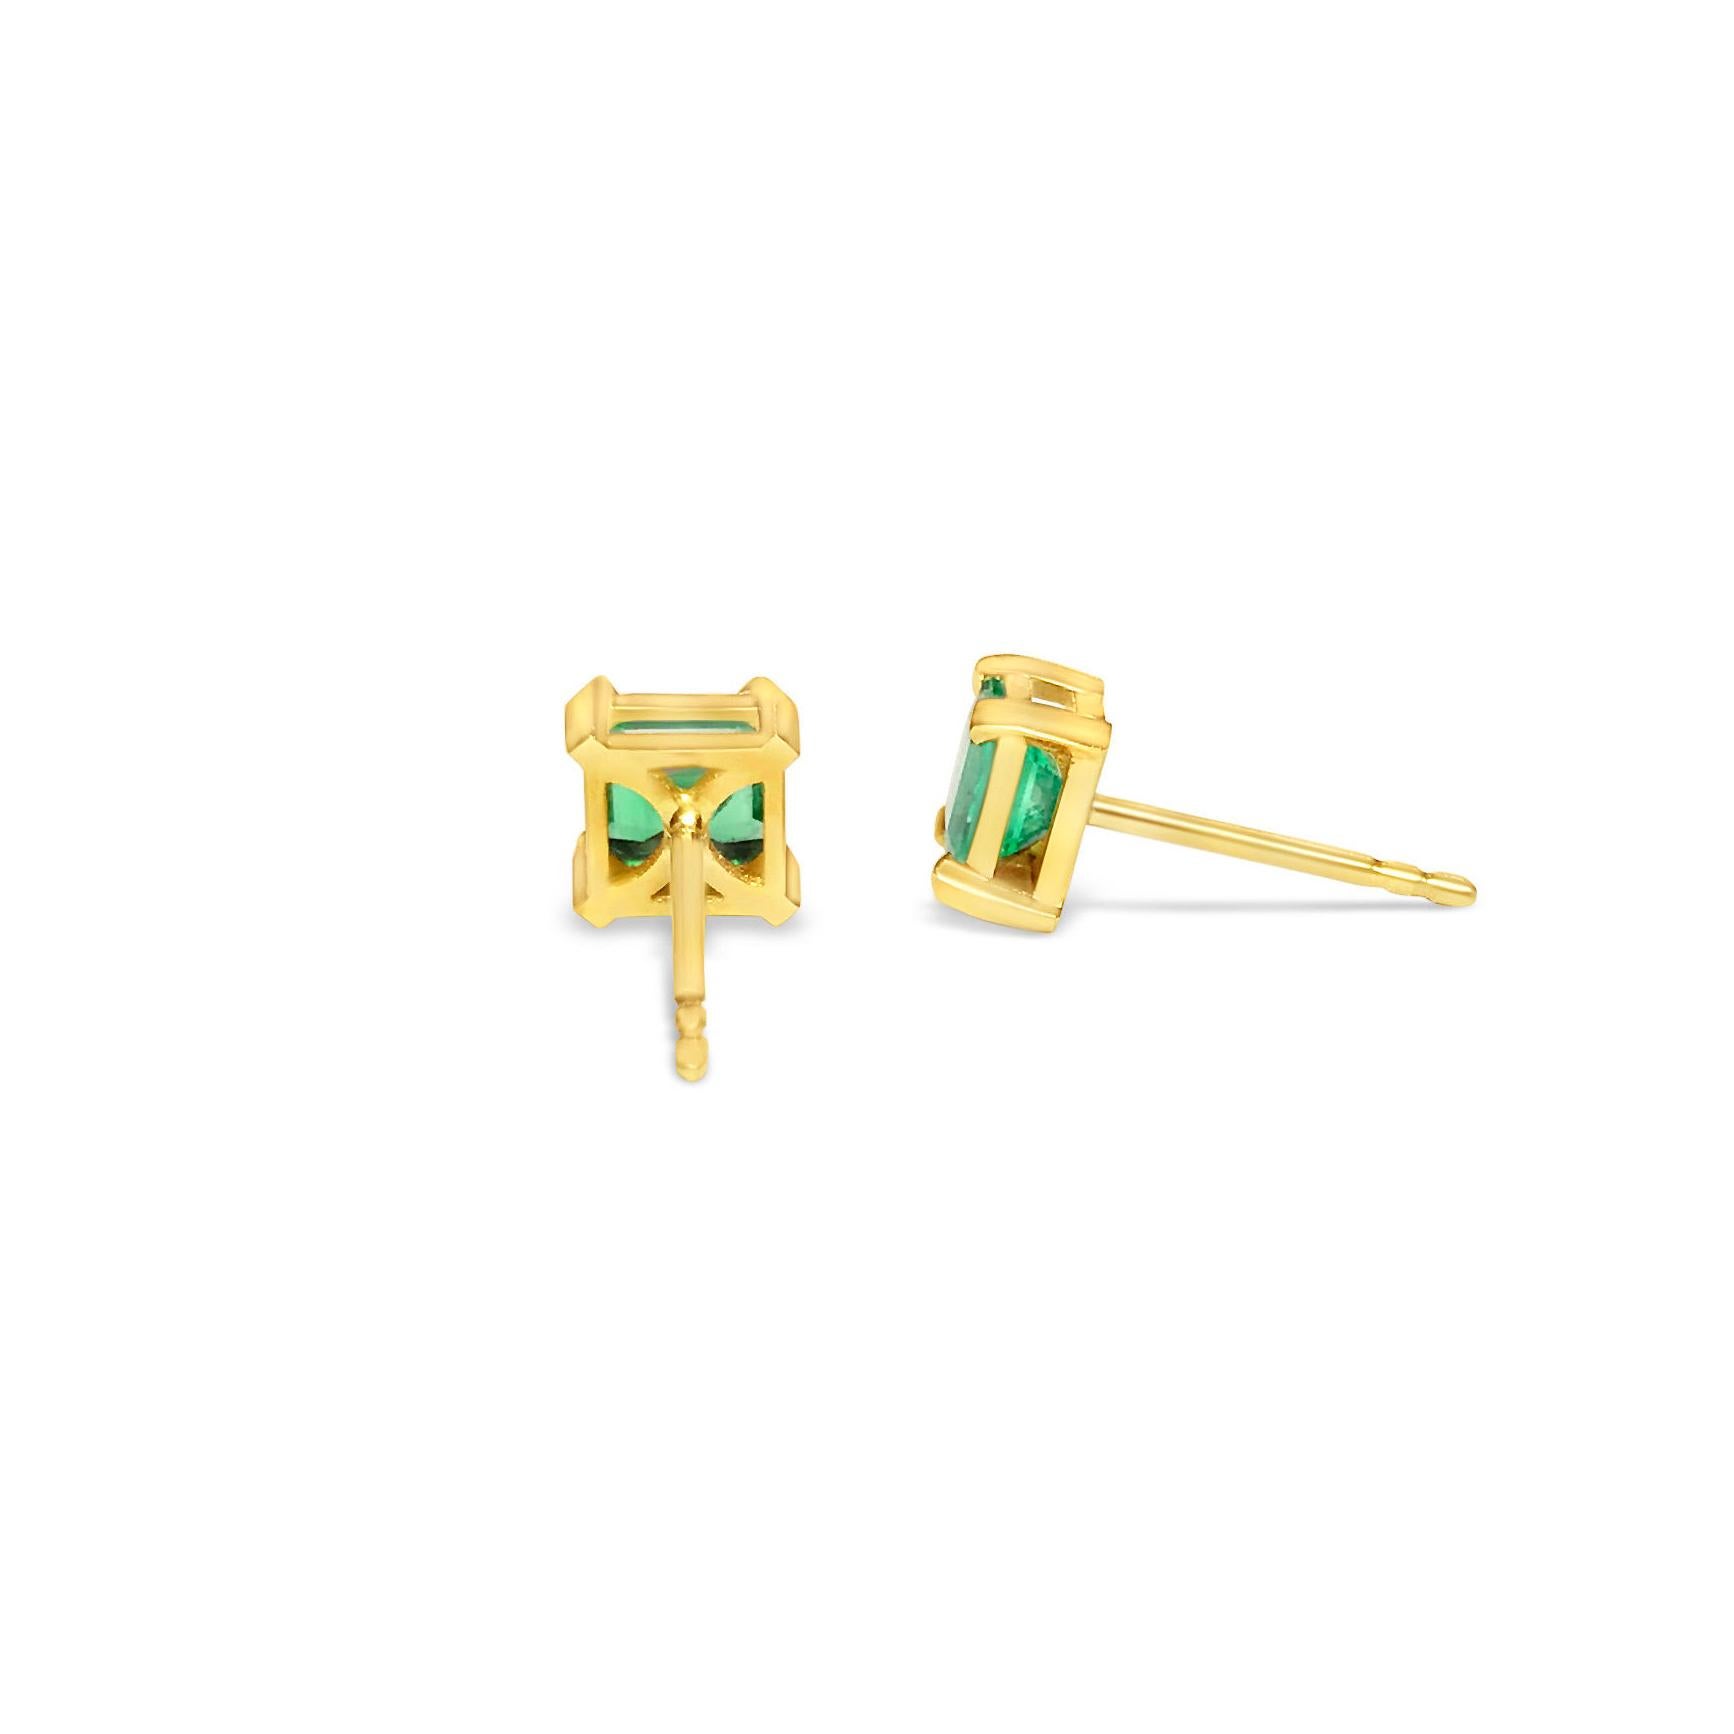 Emerald Cut Square 1ct Emerald Earrings in 14k Yellow Gold For Sale